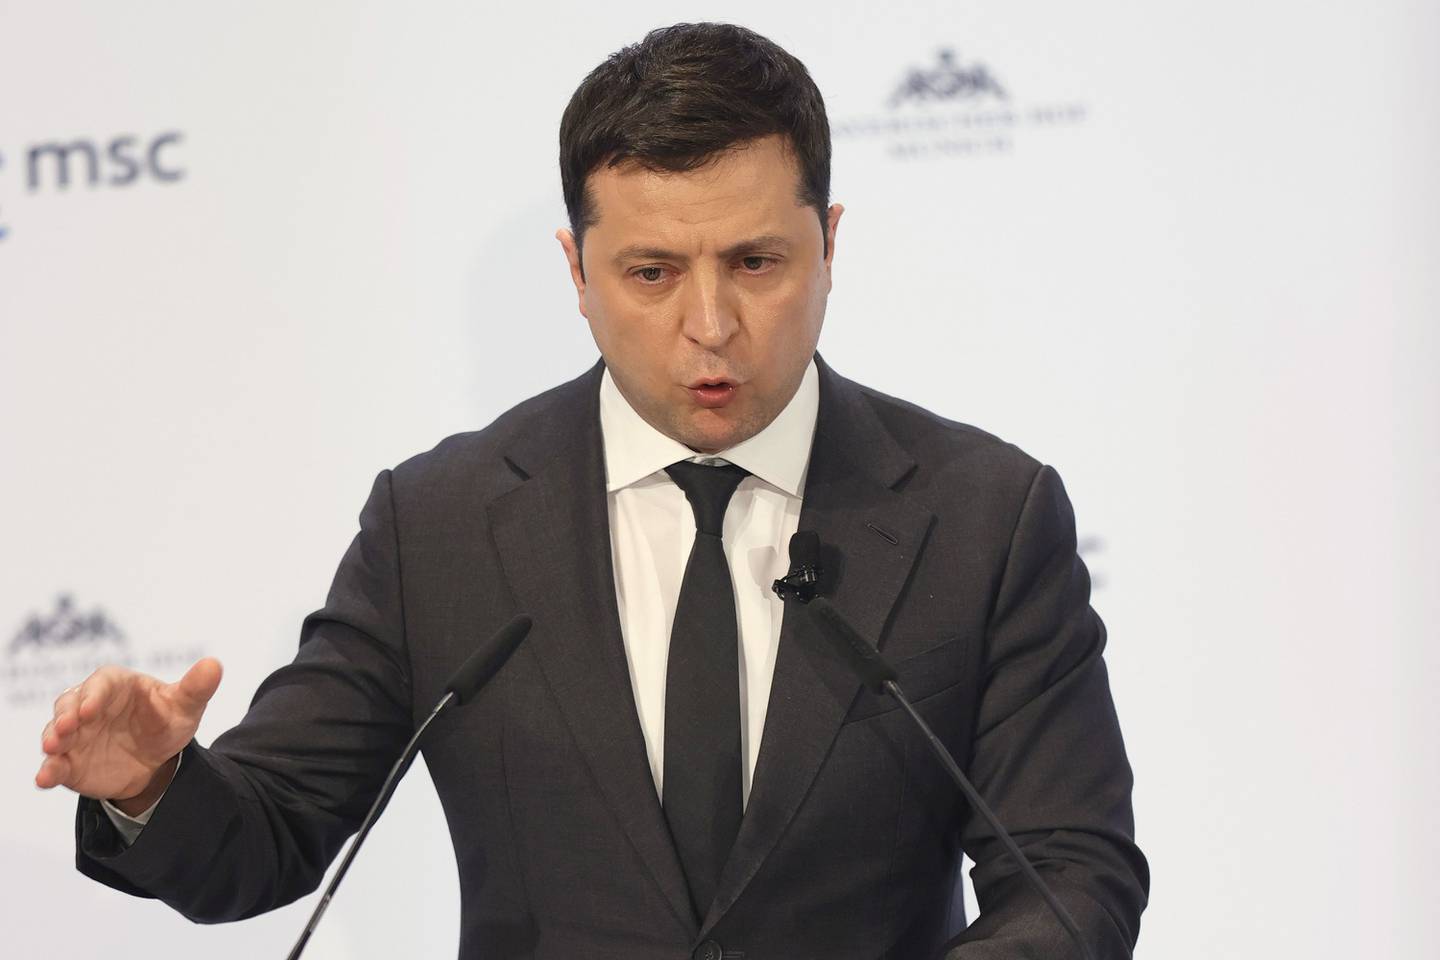 Zelenskiy speaks at the Munich Security Conference in Munich, Germany, on Feb. 19. Photographer: Pool/Getty Images Europedfd